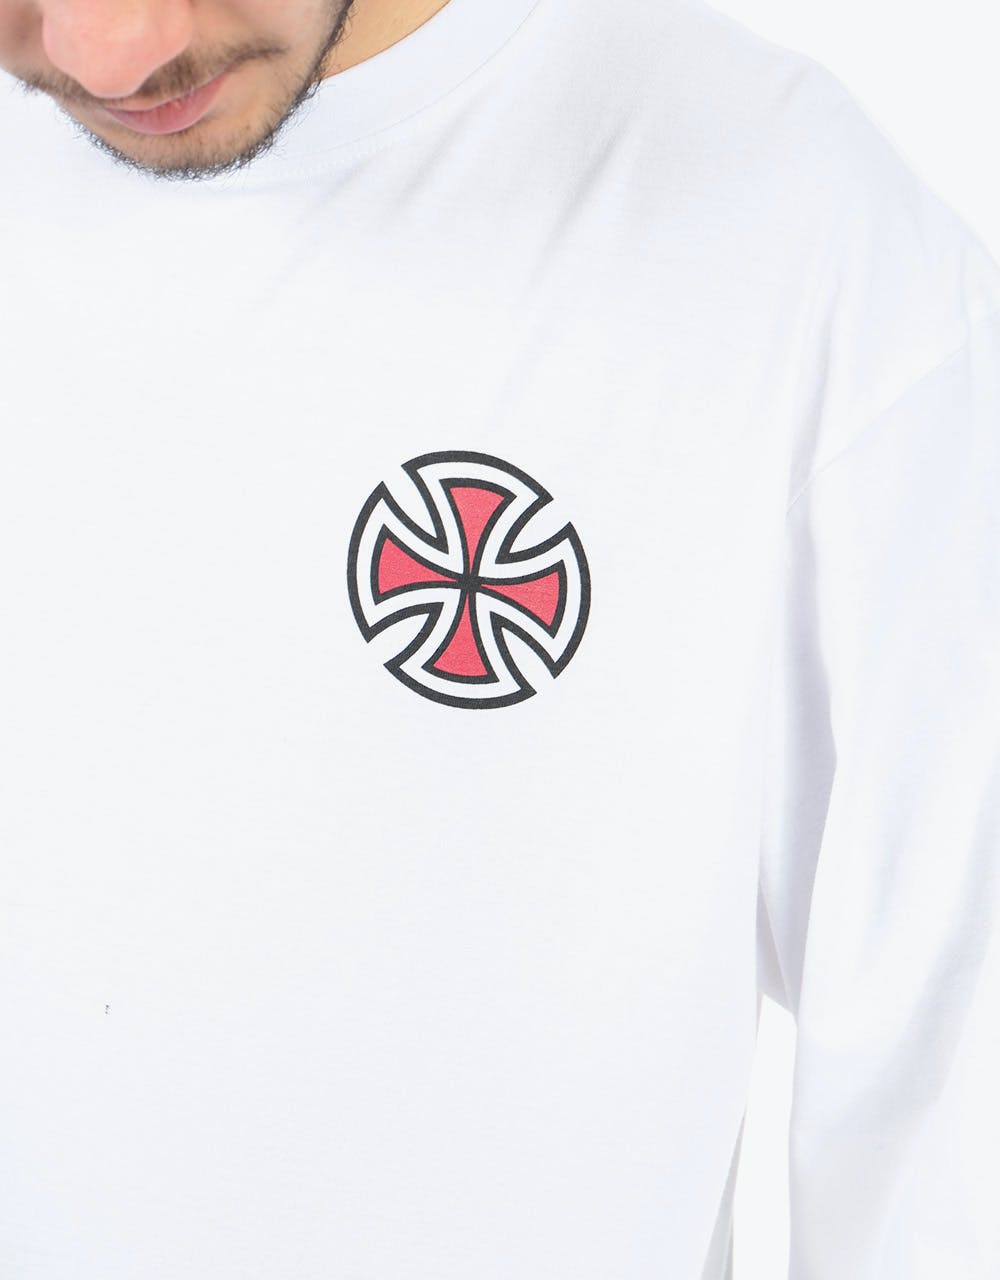 Independent Shear L/S T-Shirt - White